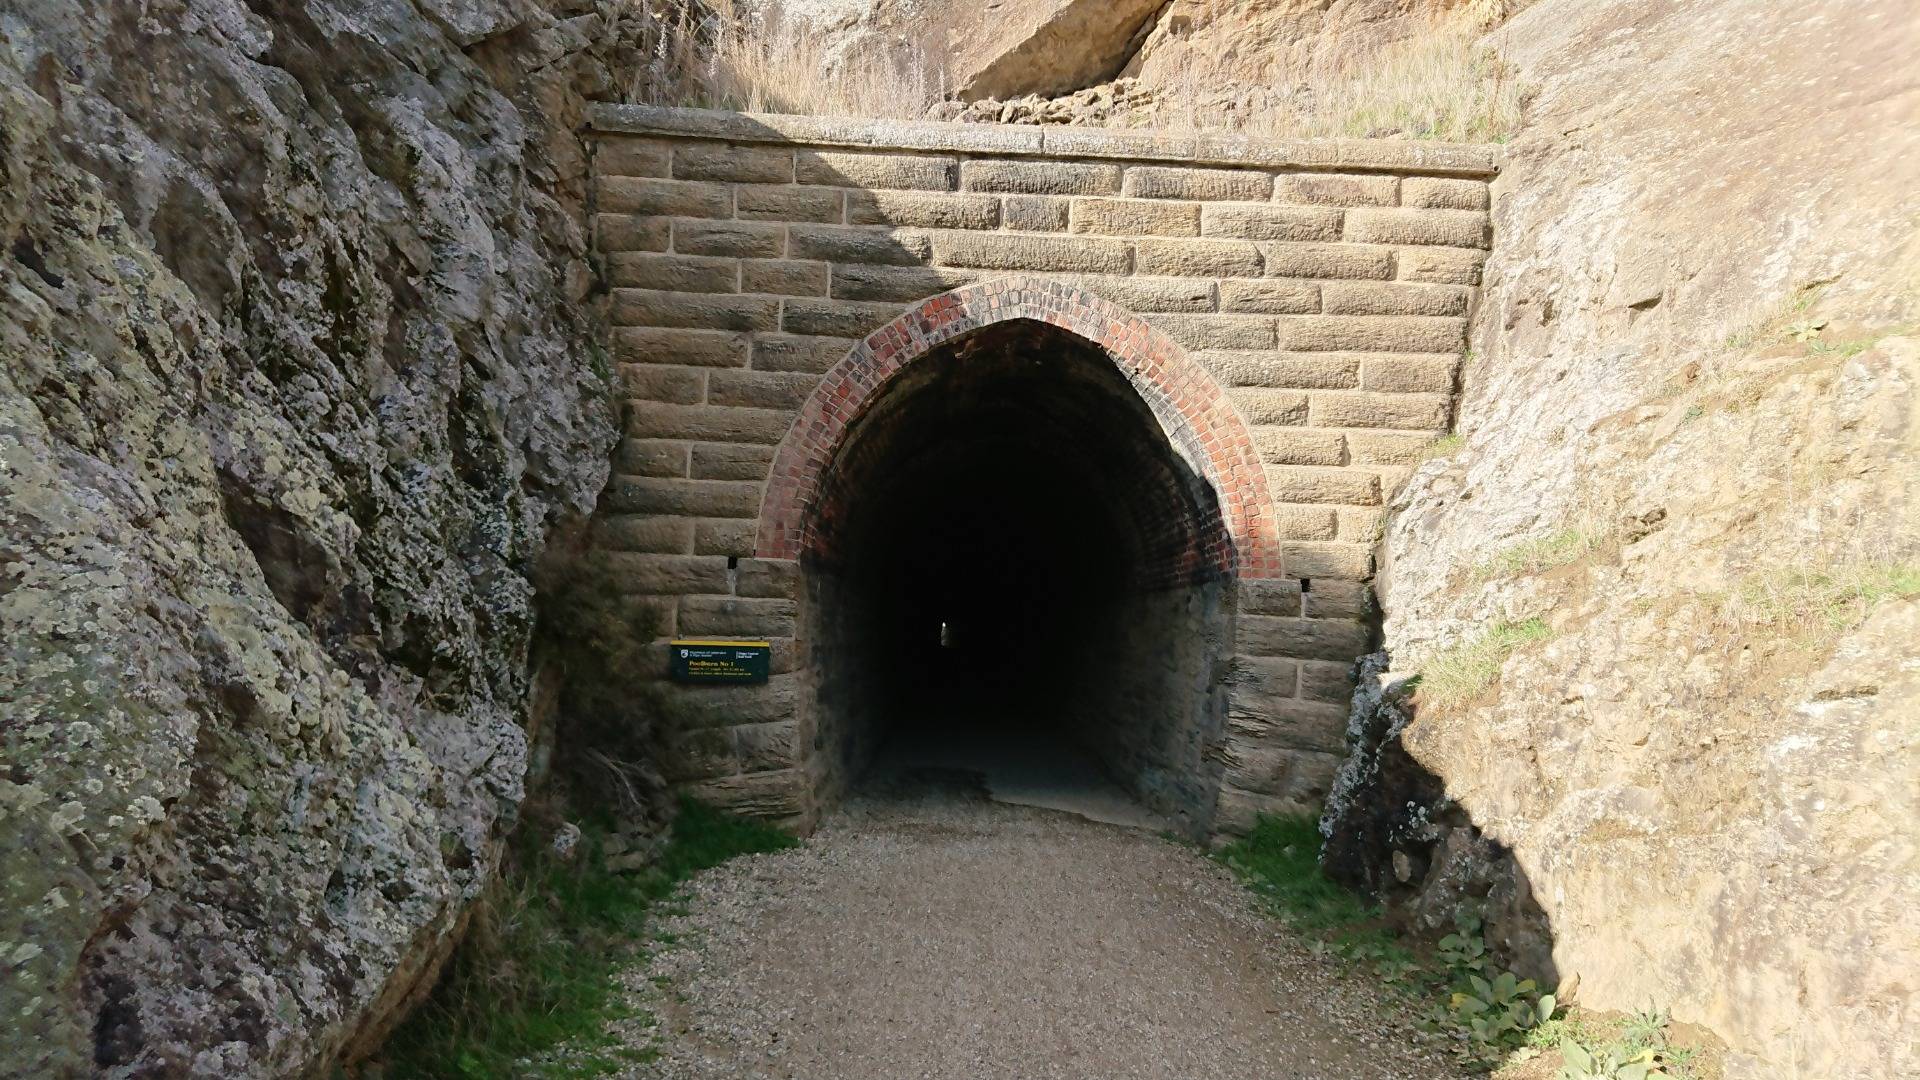 You can see the brick work at the entrance of the tunnel, which lasts for around 10m before the bare rock is exposed inside